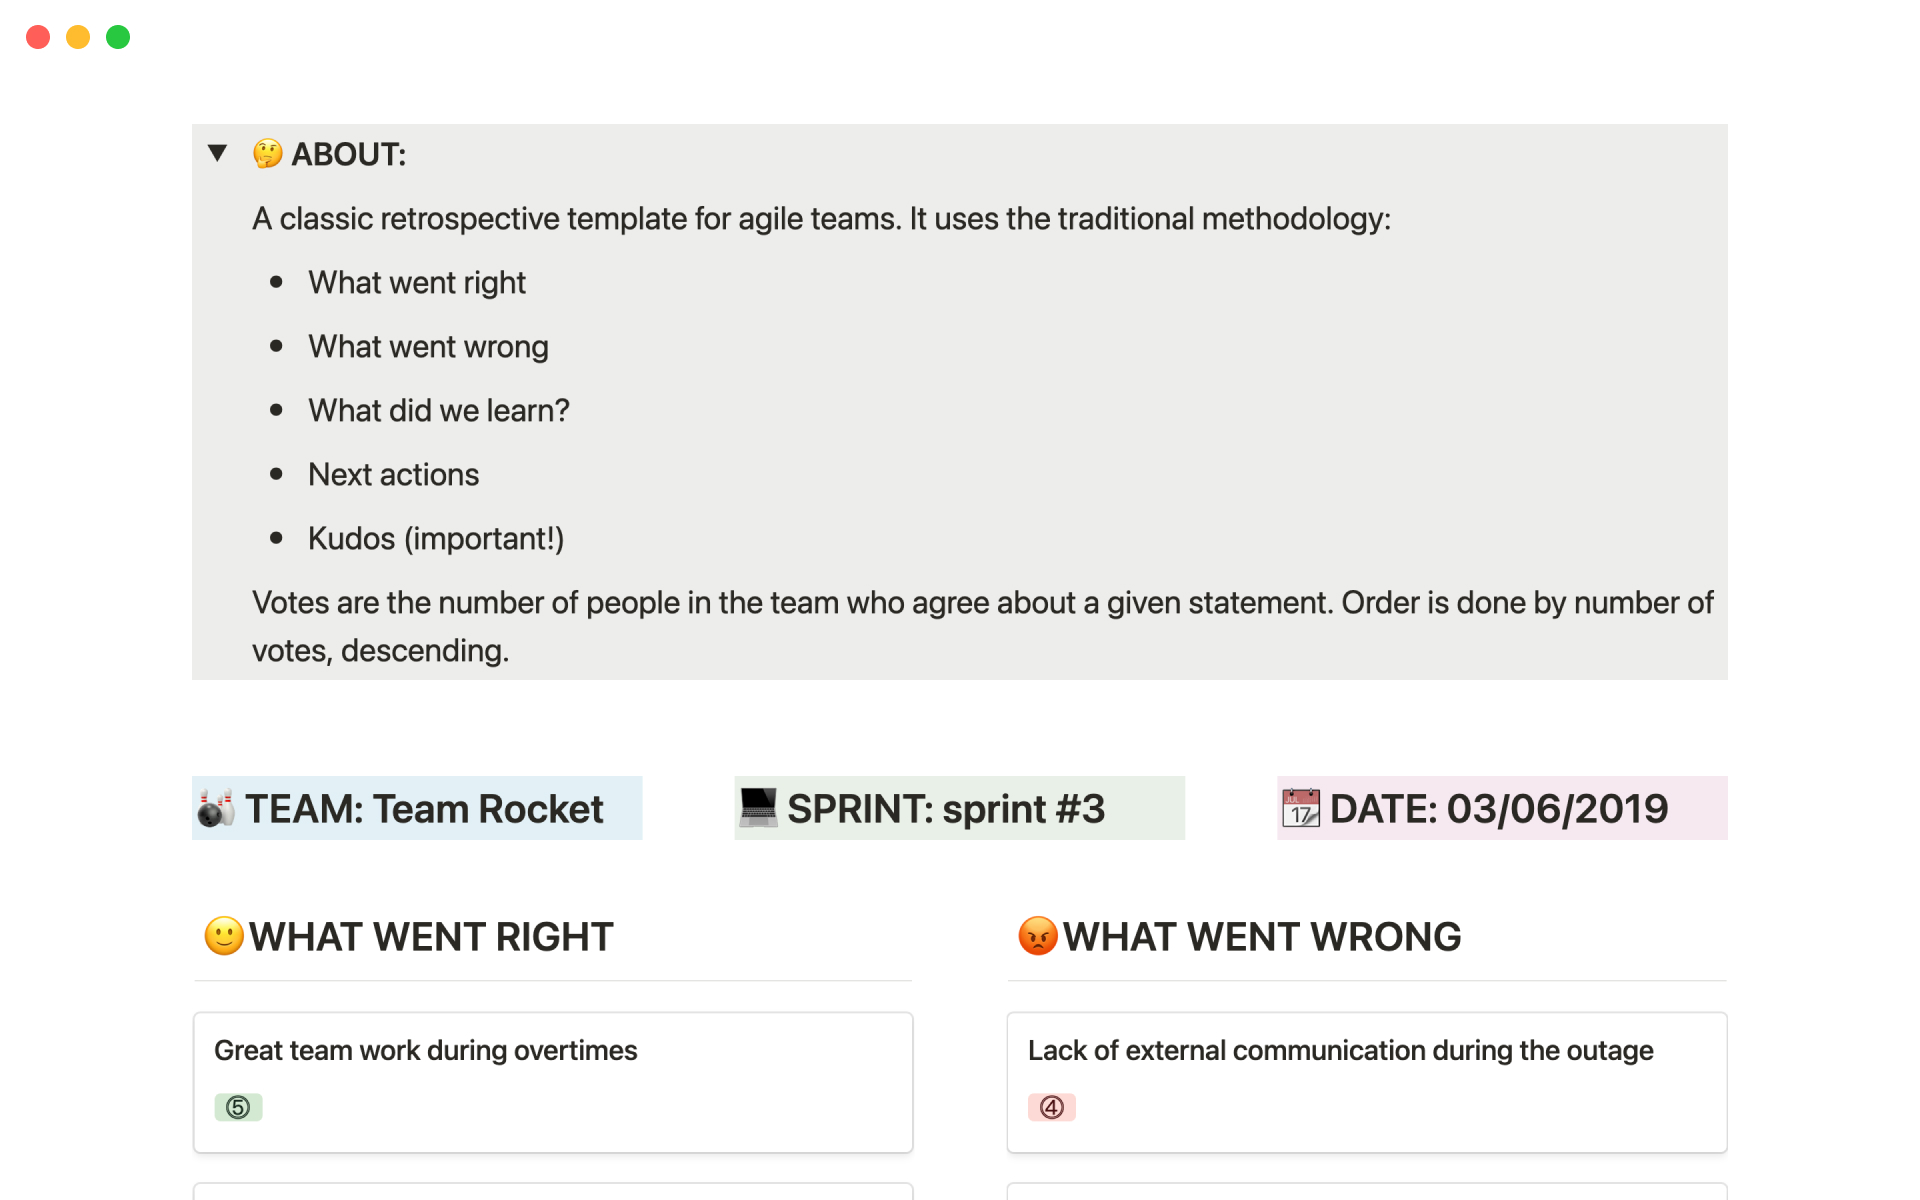 Plan your sprints and communicate them to teams with ease